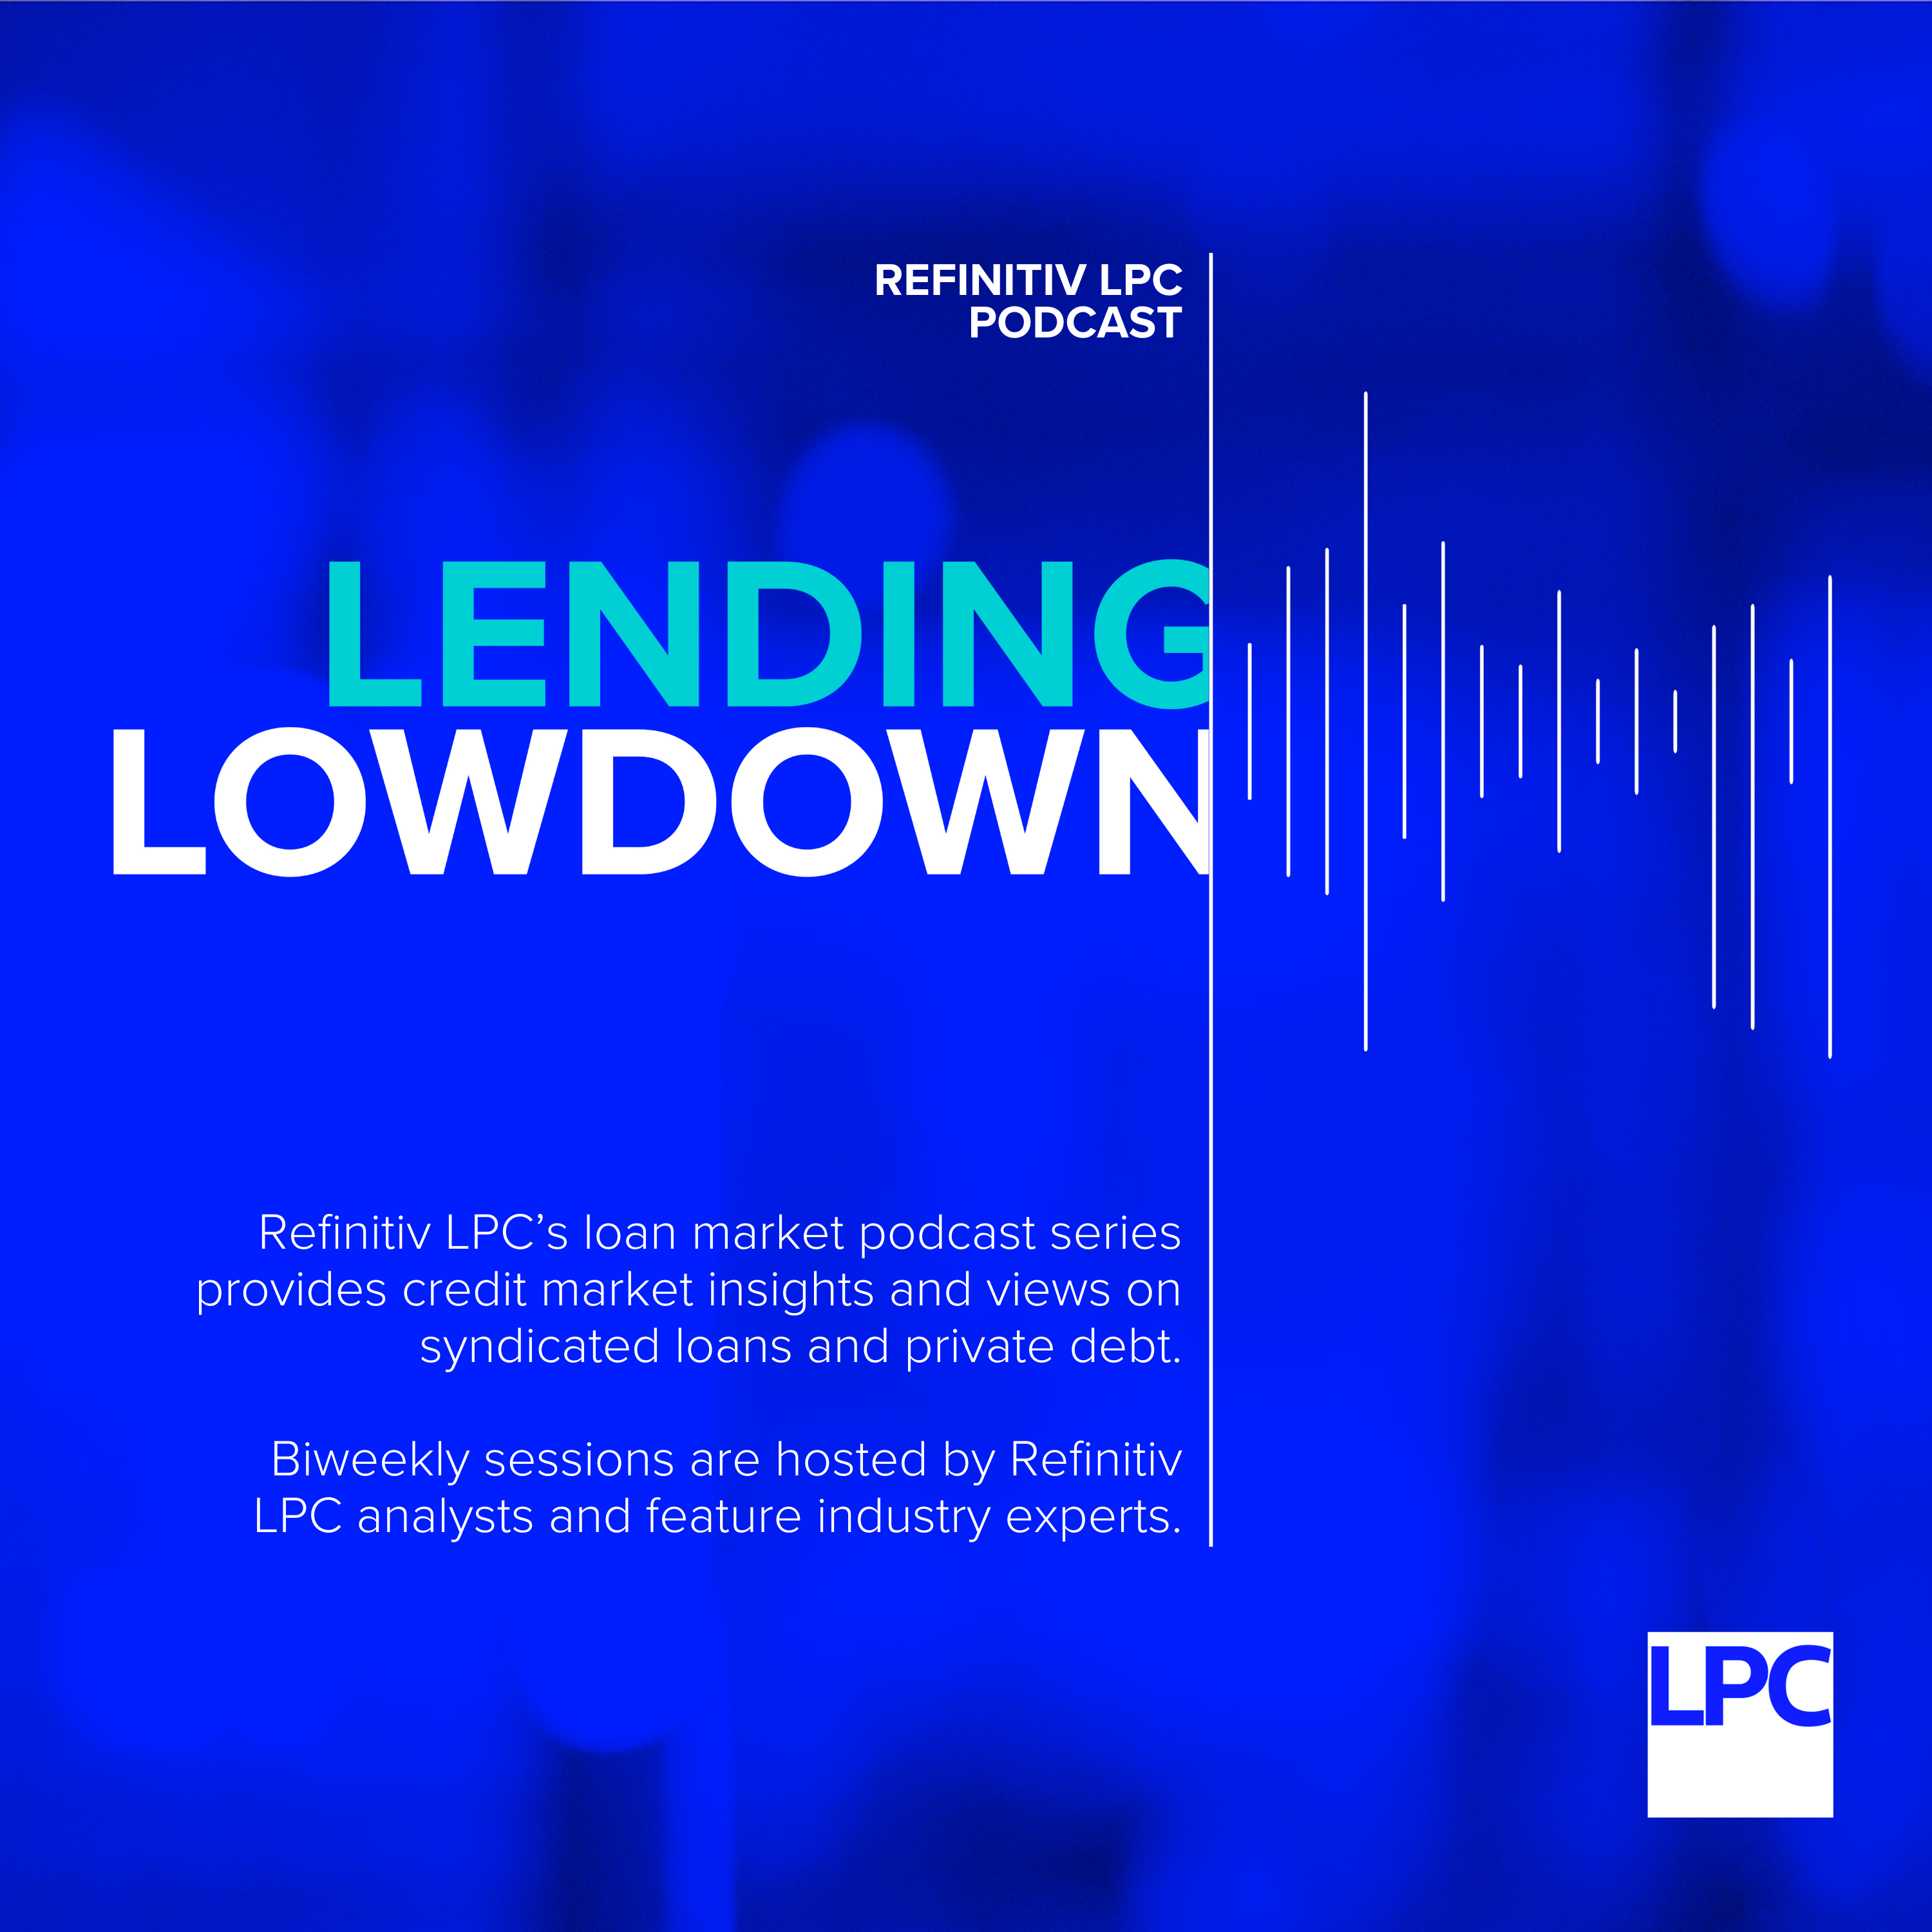 Episode 5 - State of the European Lending Space